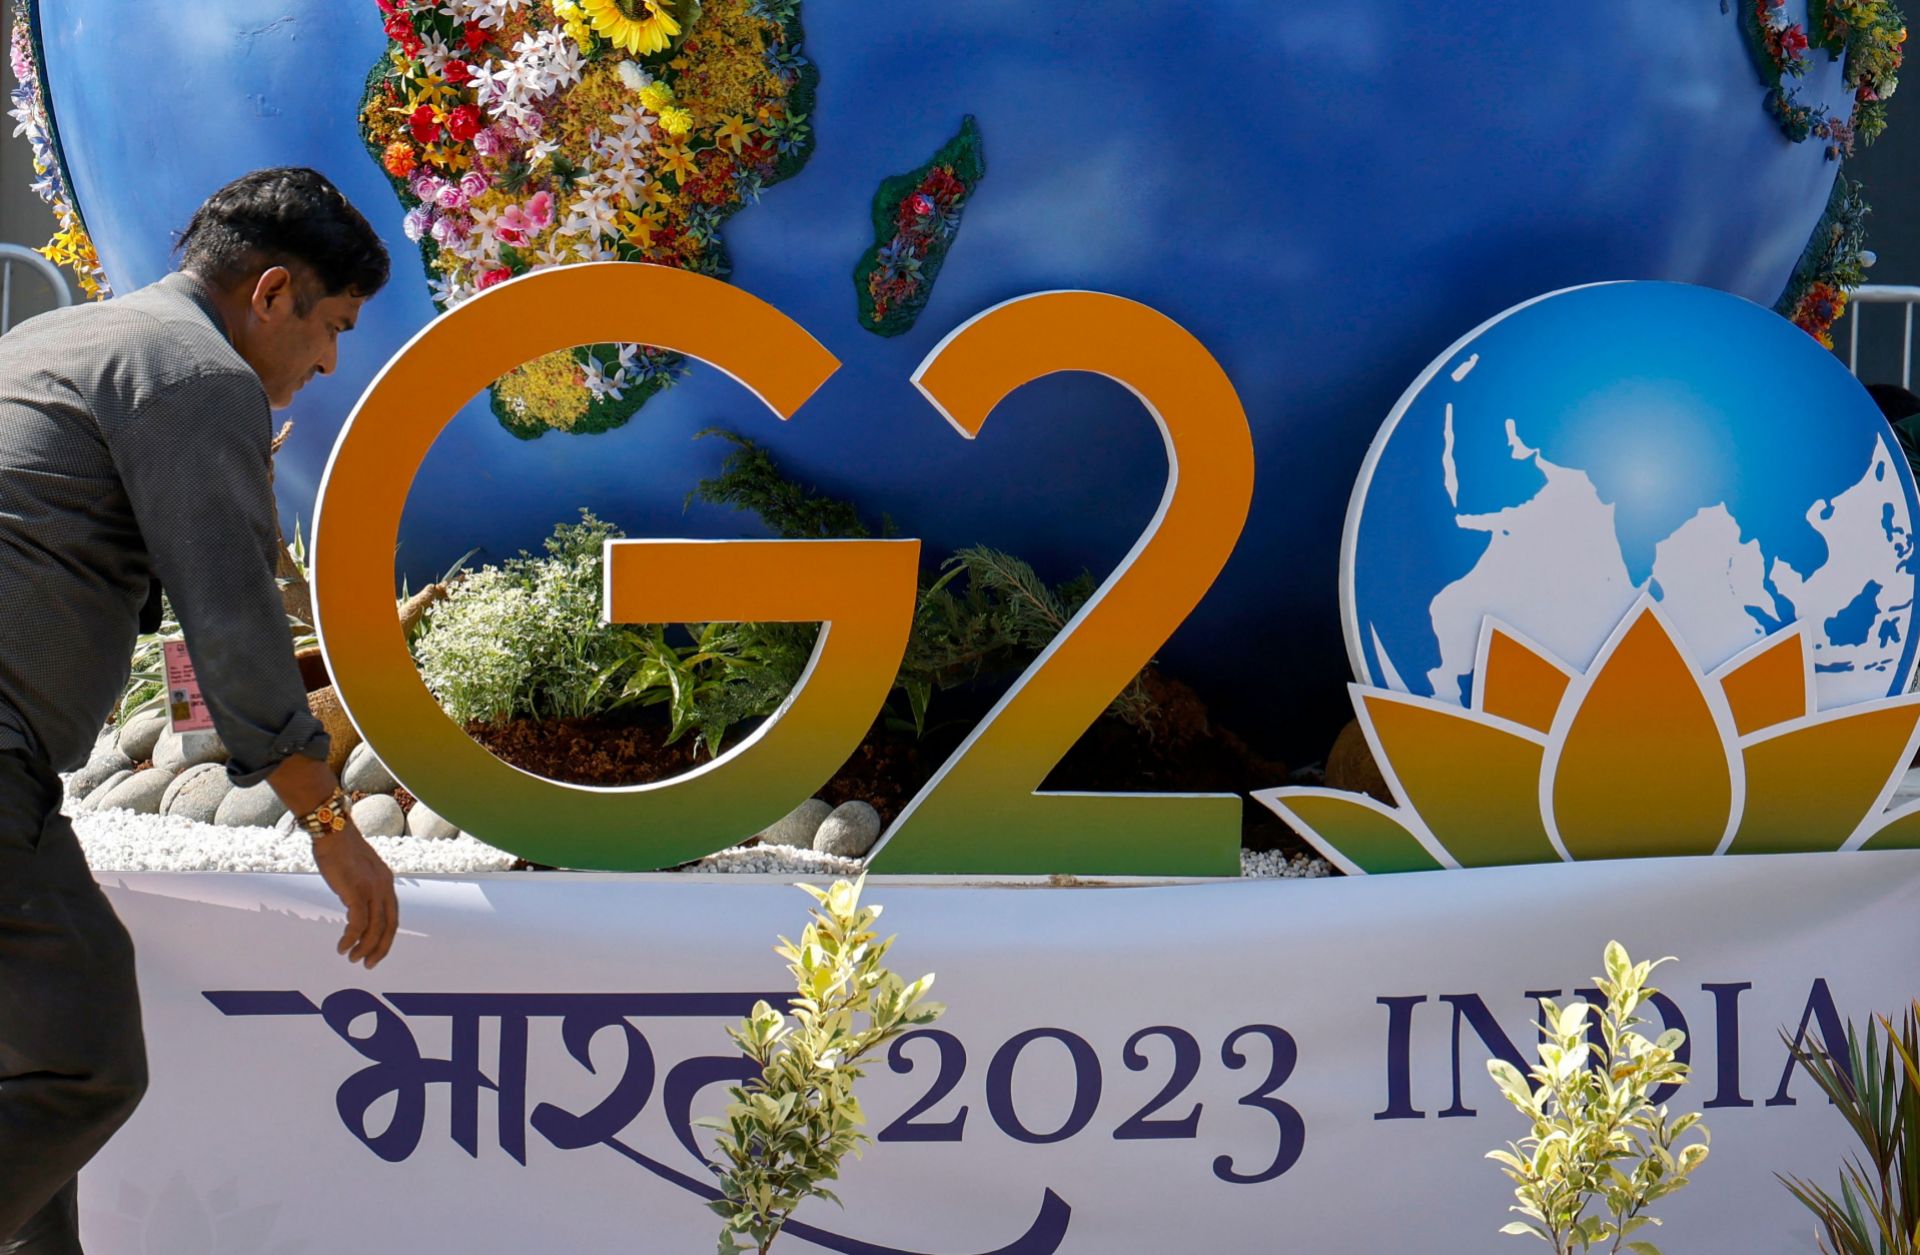 A worker decorates a G20 installation on the eve of the two-day G20 summit in New Delhi on September 8, 2023.